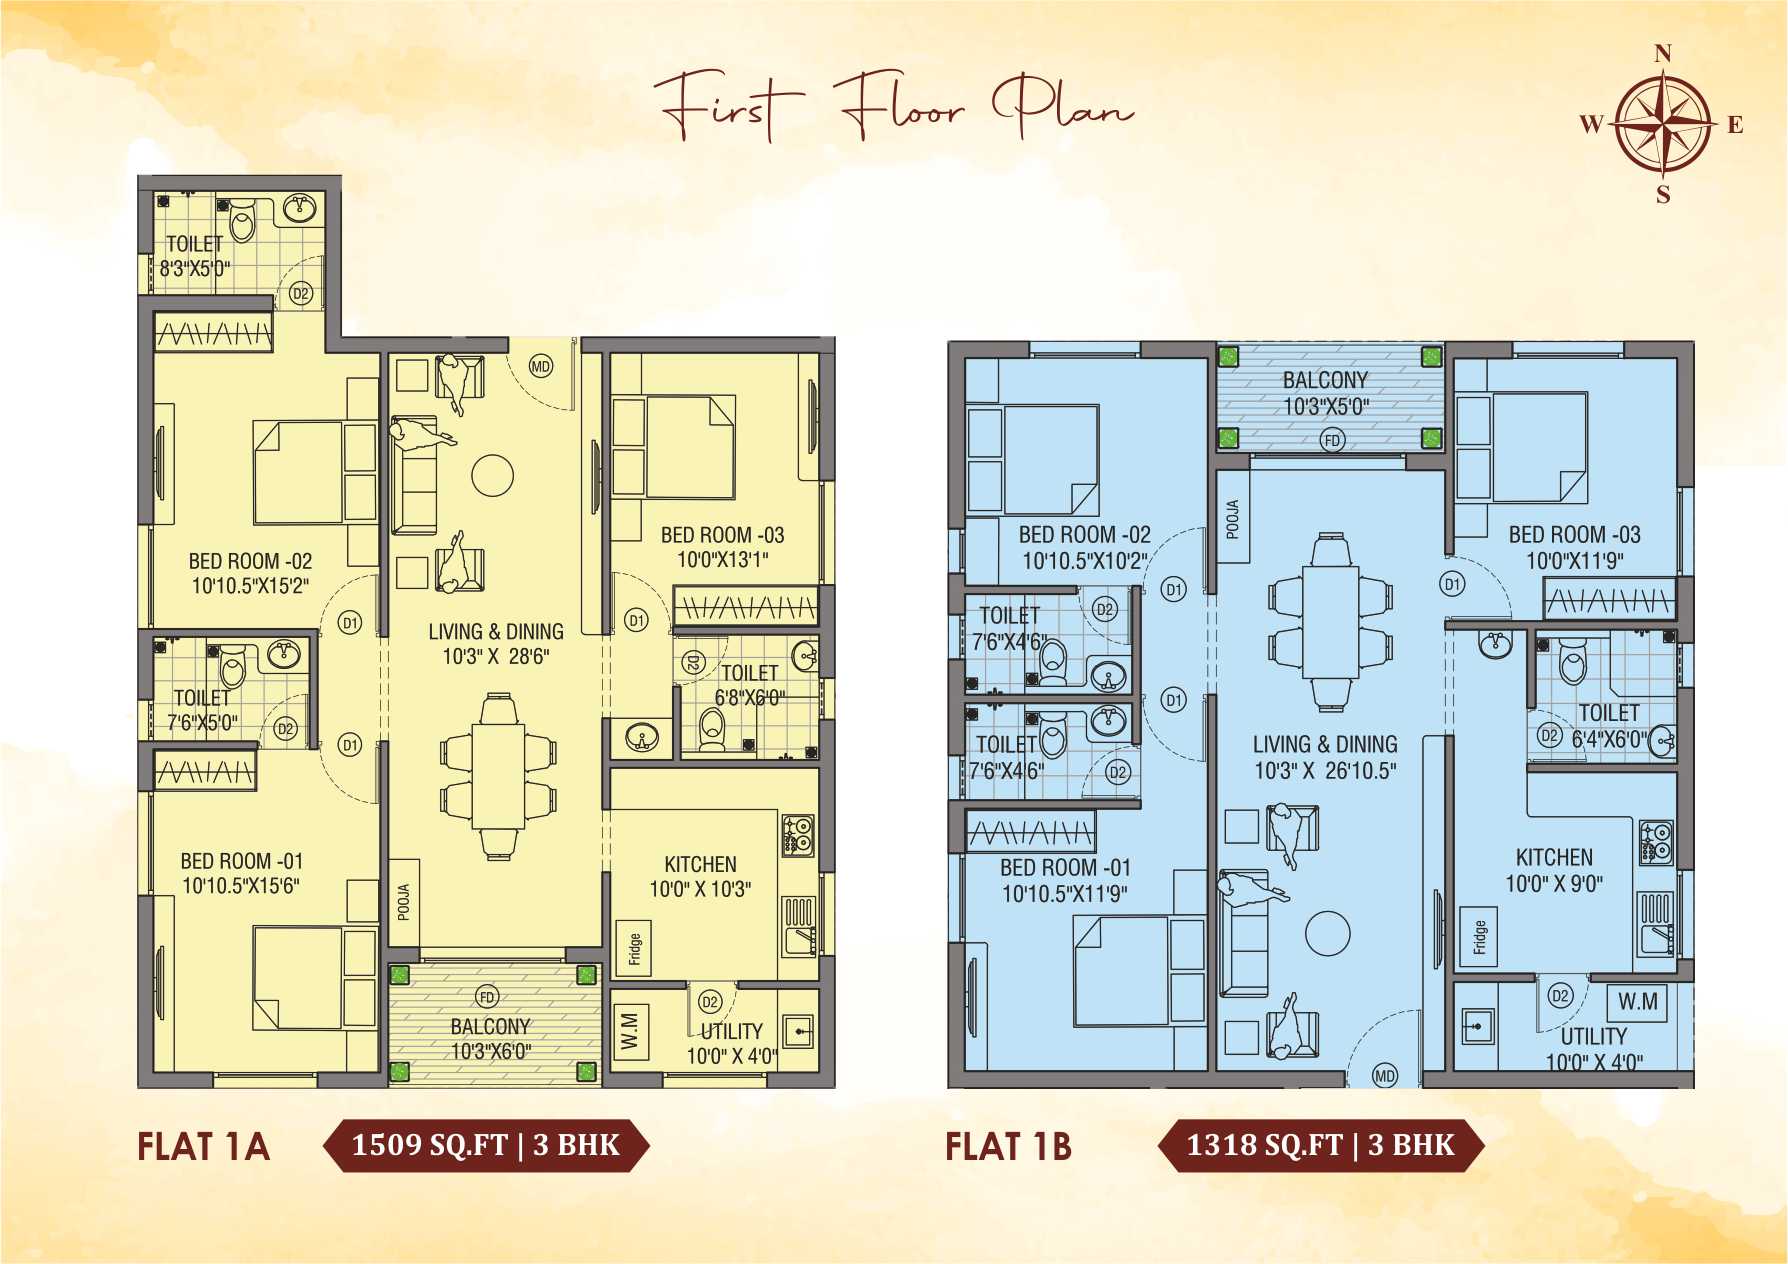 https://firmfoundations.in/projects/floorplans/thumbnails/16954467798Thayagam_1st.jpg